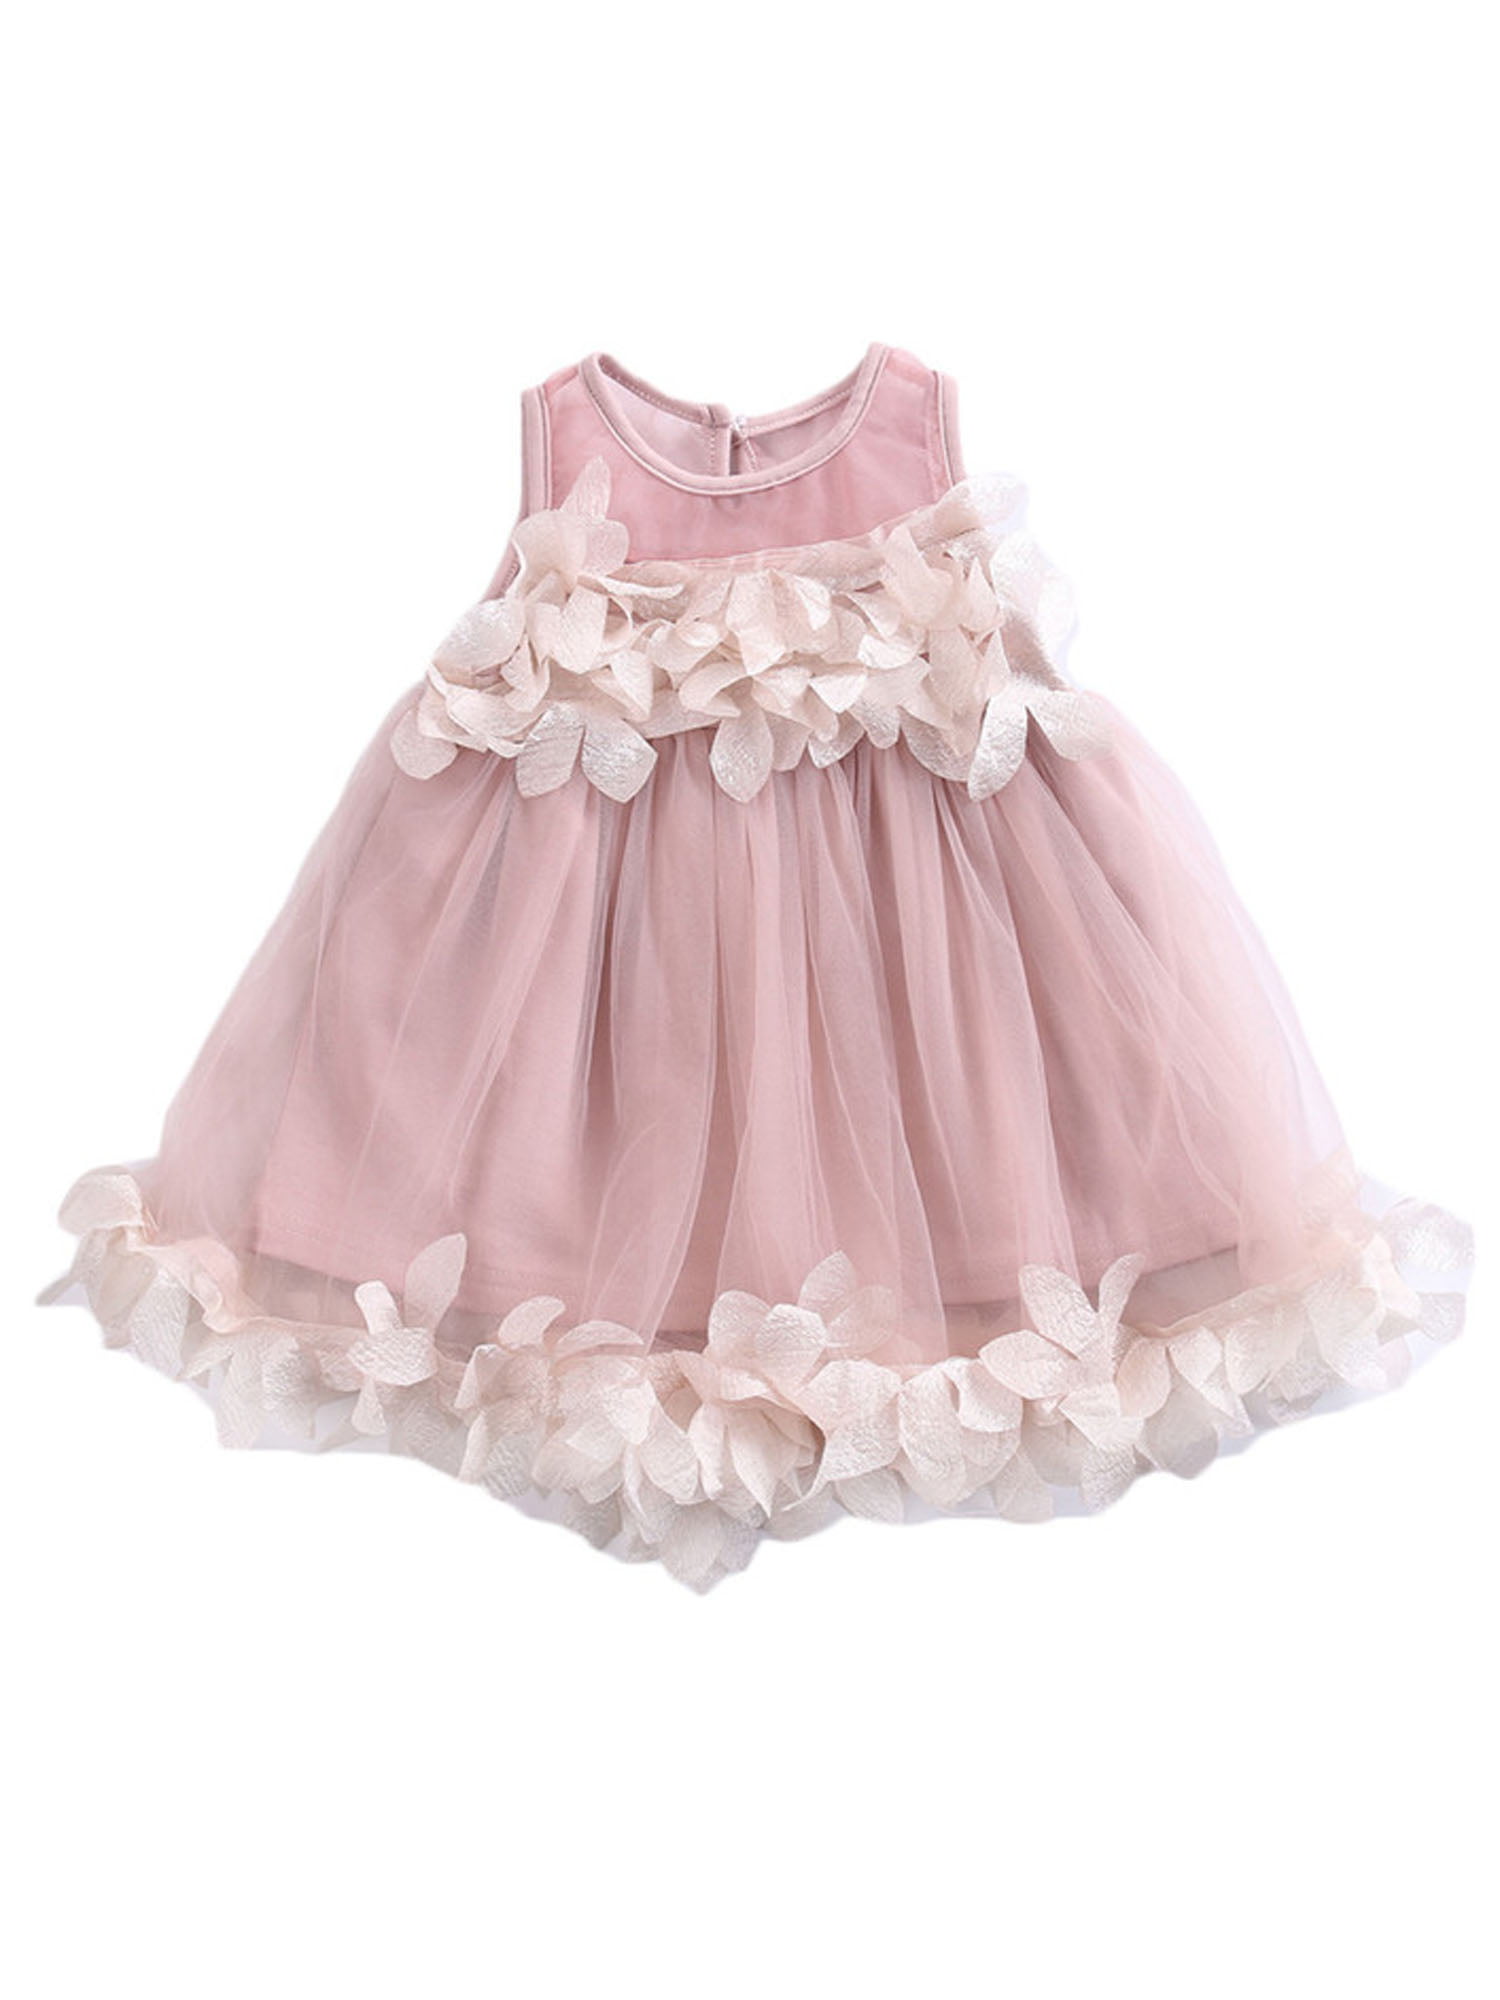 Toddler Girls Petals Tulle Tutu Dress Princess Wedding Pageant Party Formal Gown